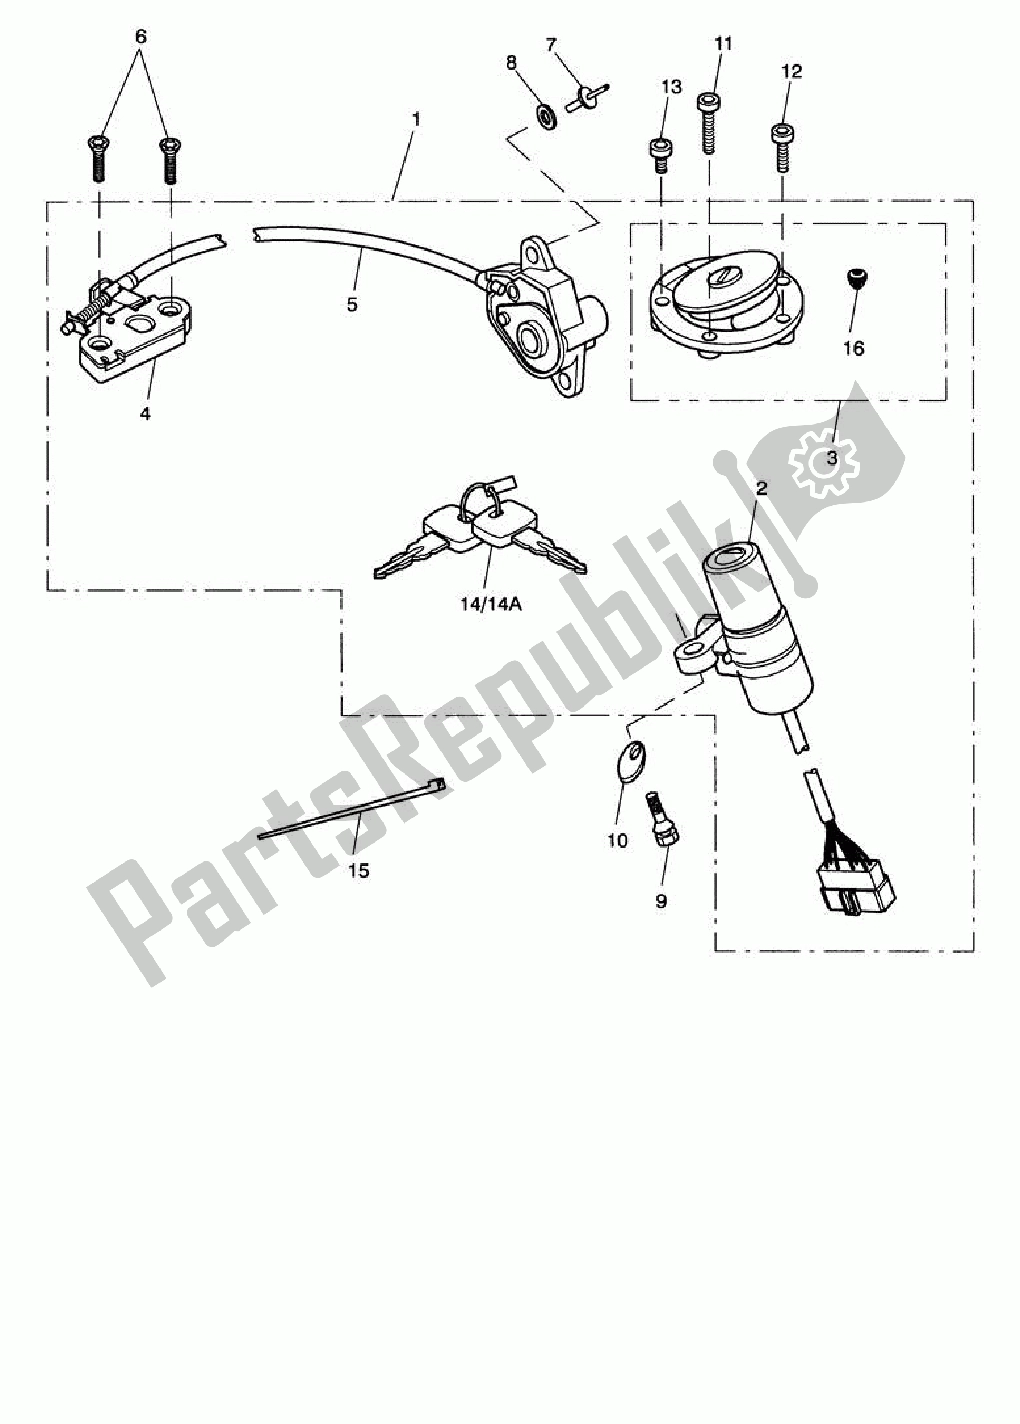 All parts for the Ignition Switch & Lock Set >333178 of the Triumph Speed Triple 1050 2008 - 2012